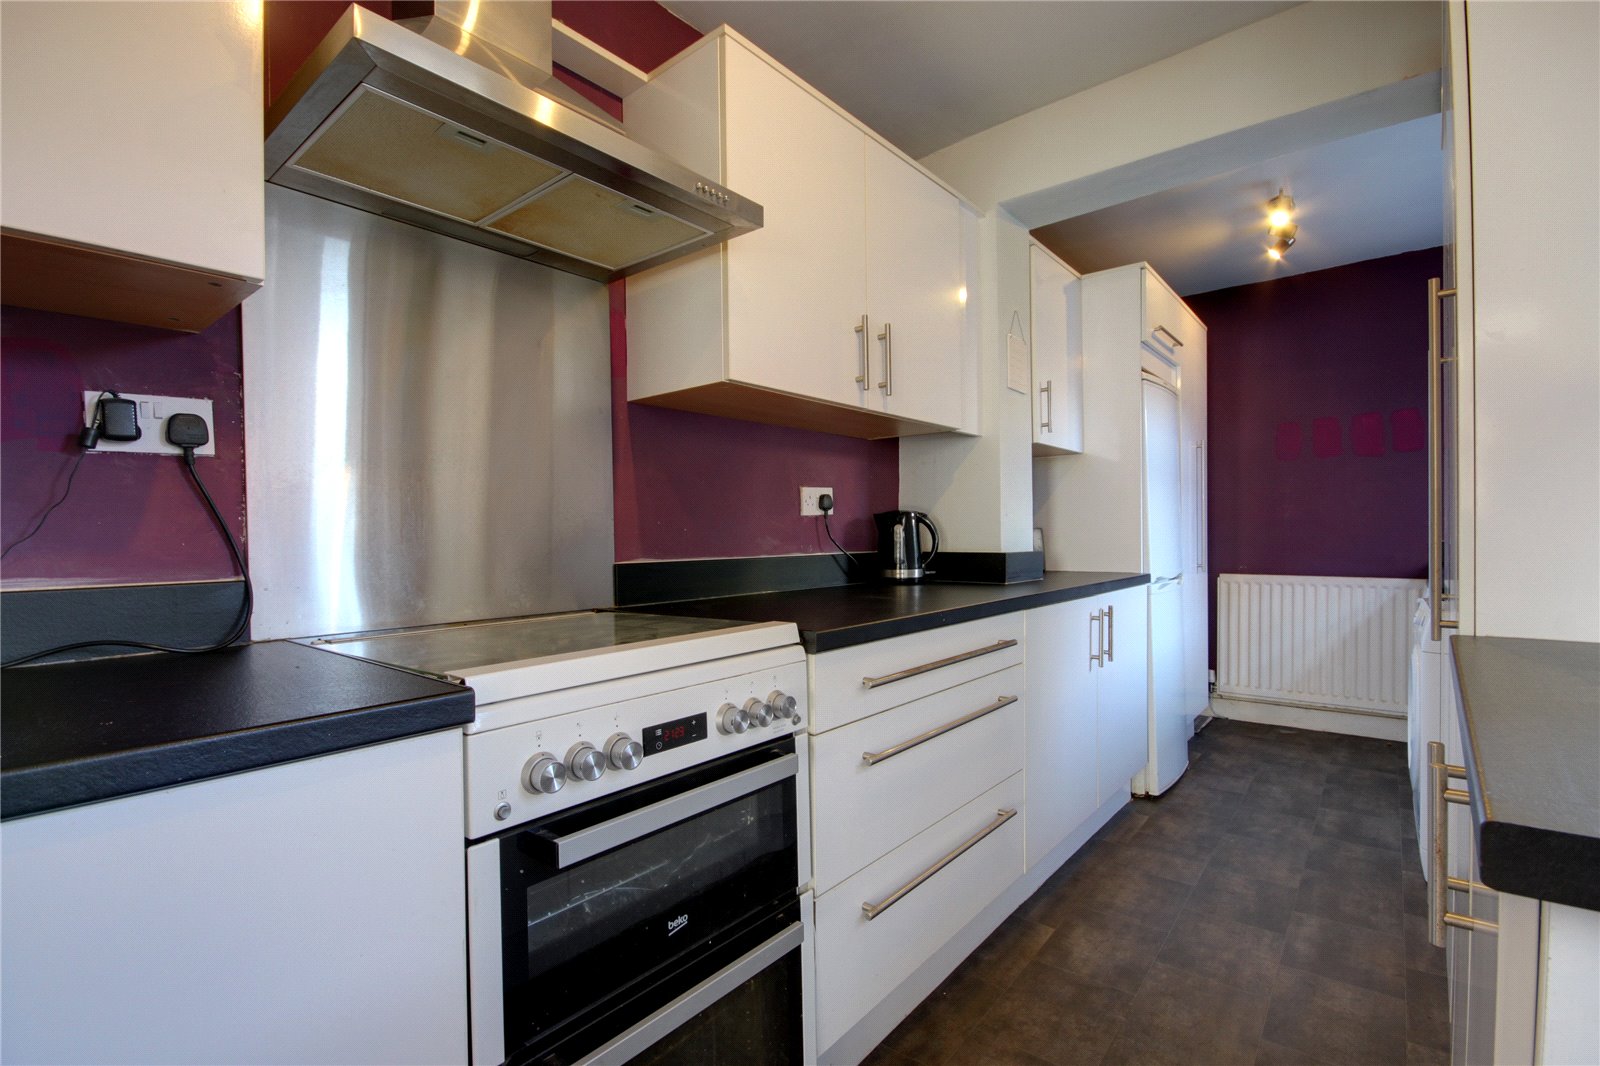 2 bed house to rent - Property Image 1